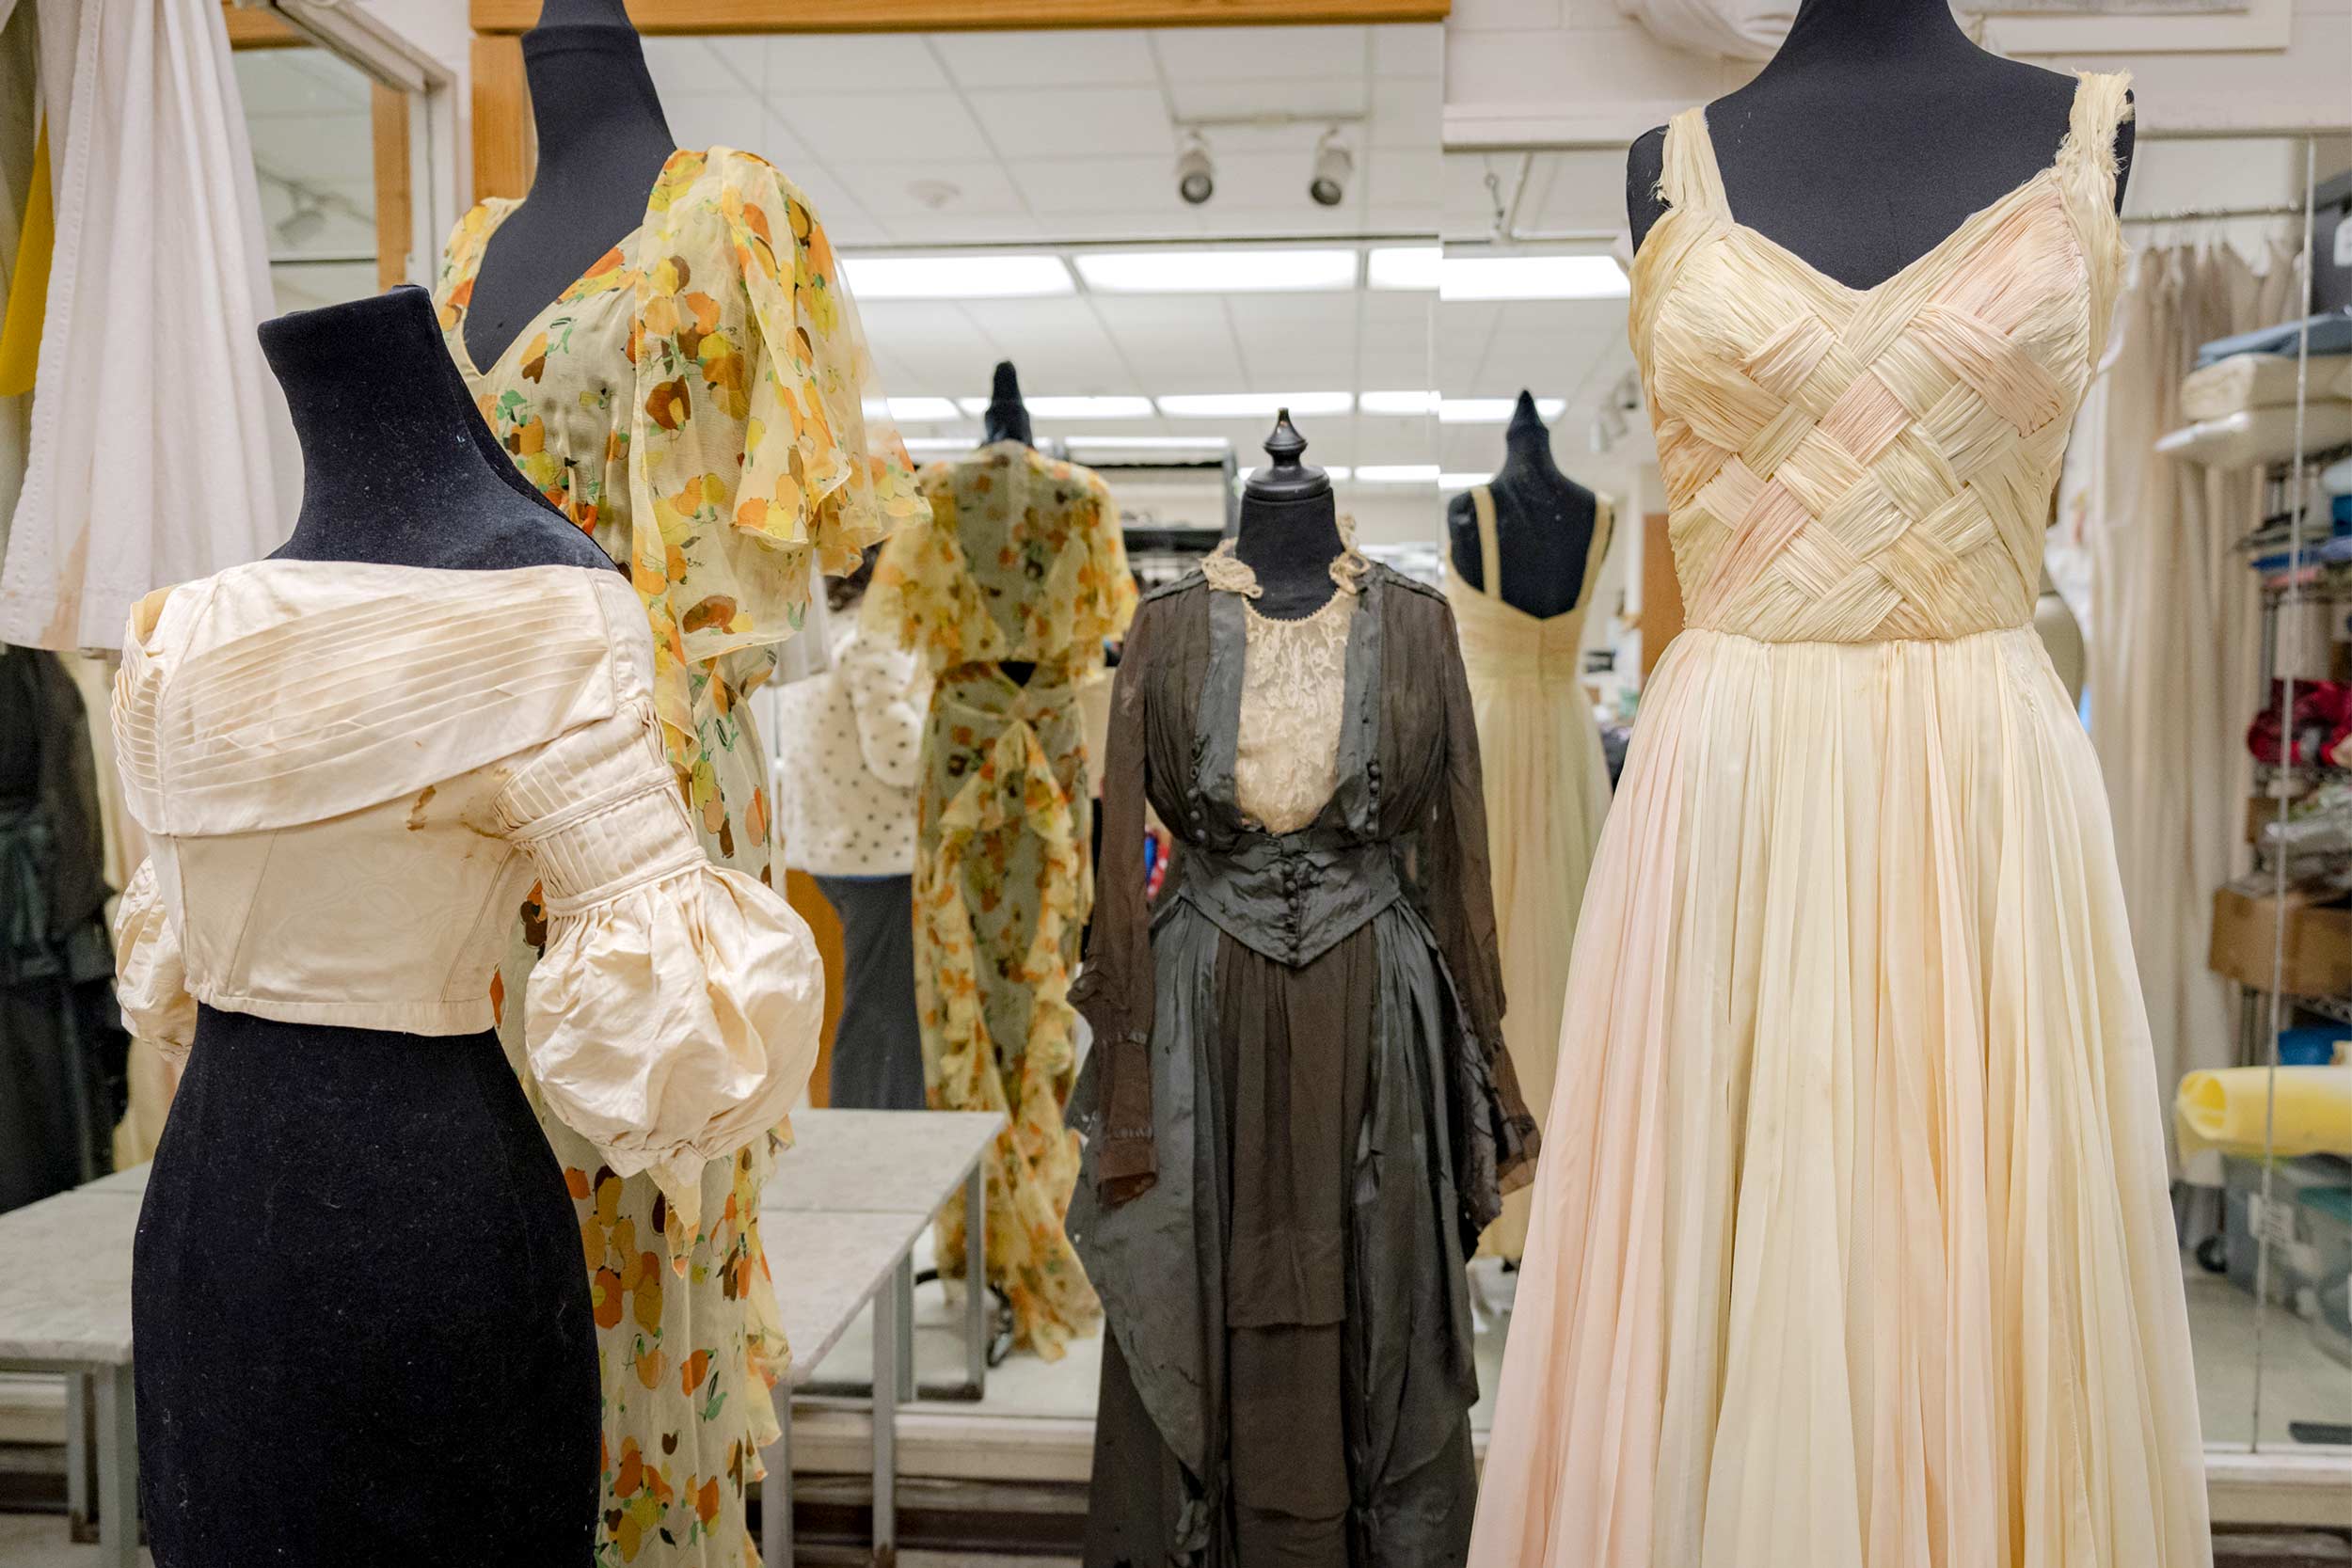 Several dresses are shown on mannequins. One on the left features an intricate top with puffy sleeves and a plain black skirt; another towards the back features flowy sleeves and yellow, orange and brown fruit; an antique black and white dress; and an off-white sleeveless dress with a lattice pattern.